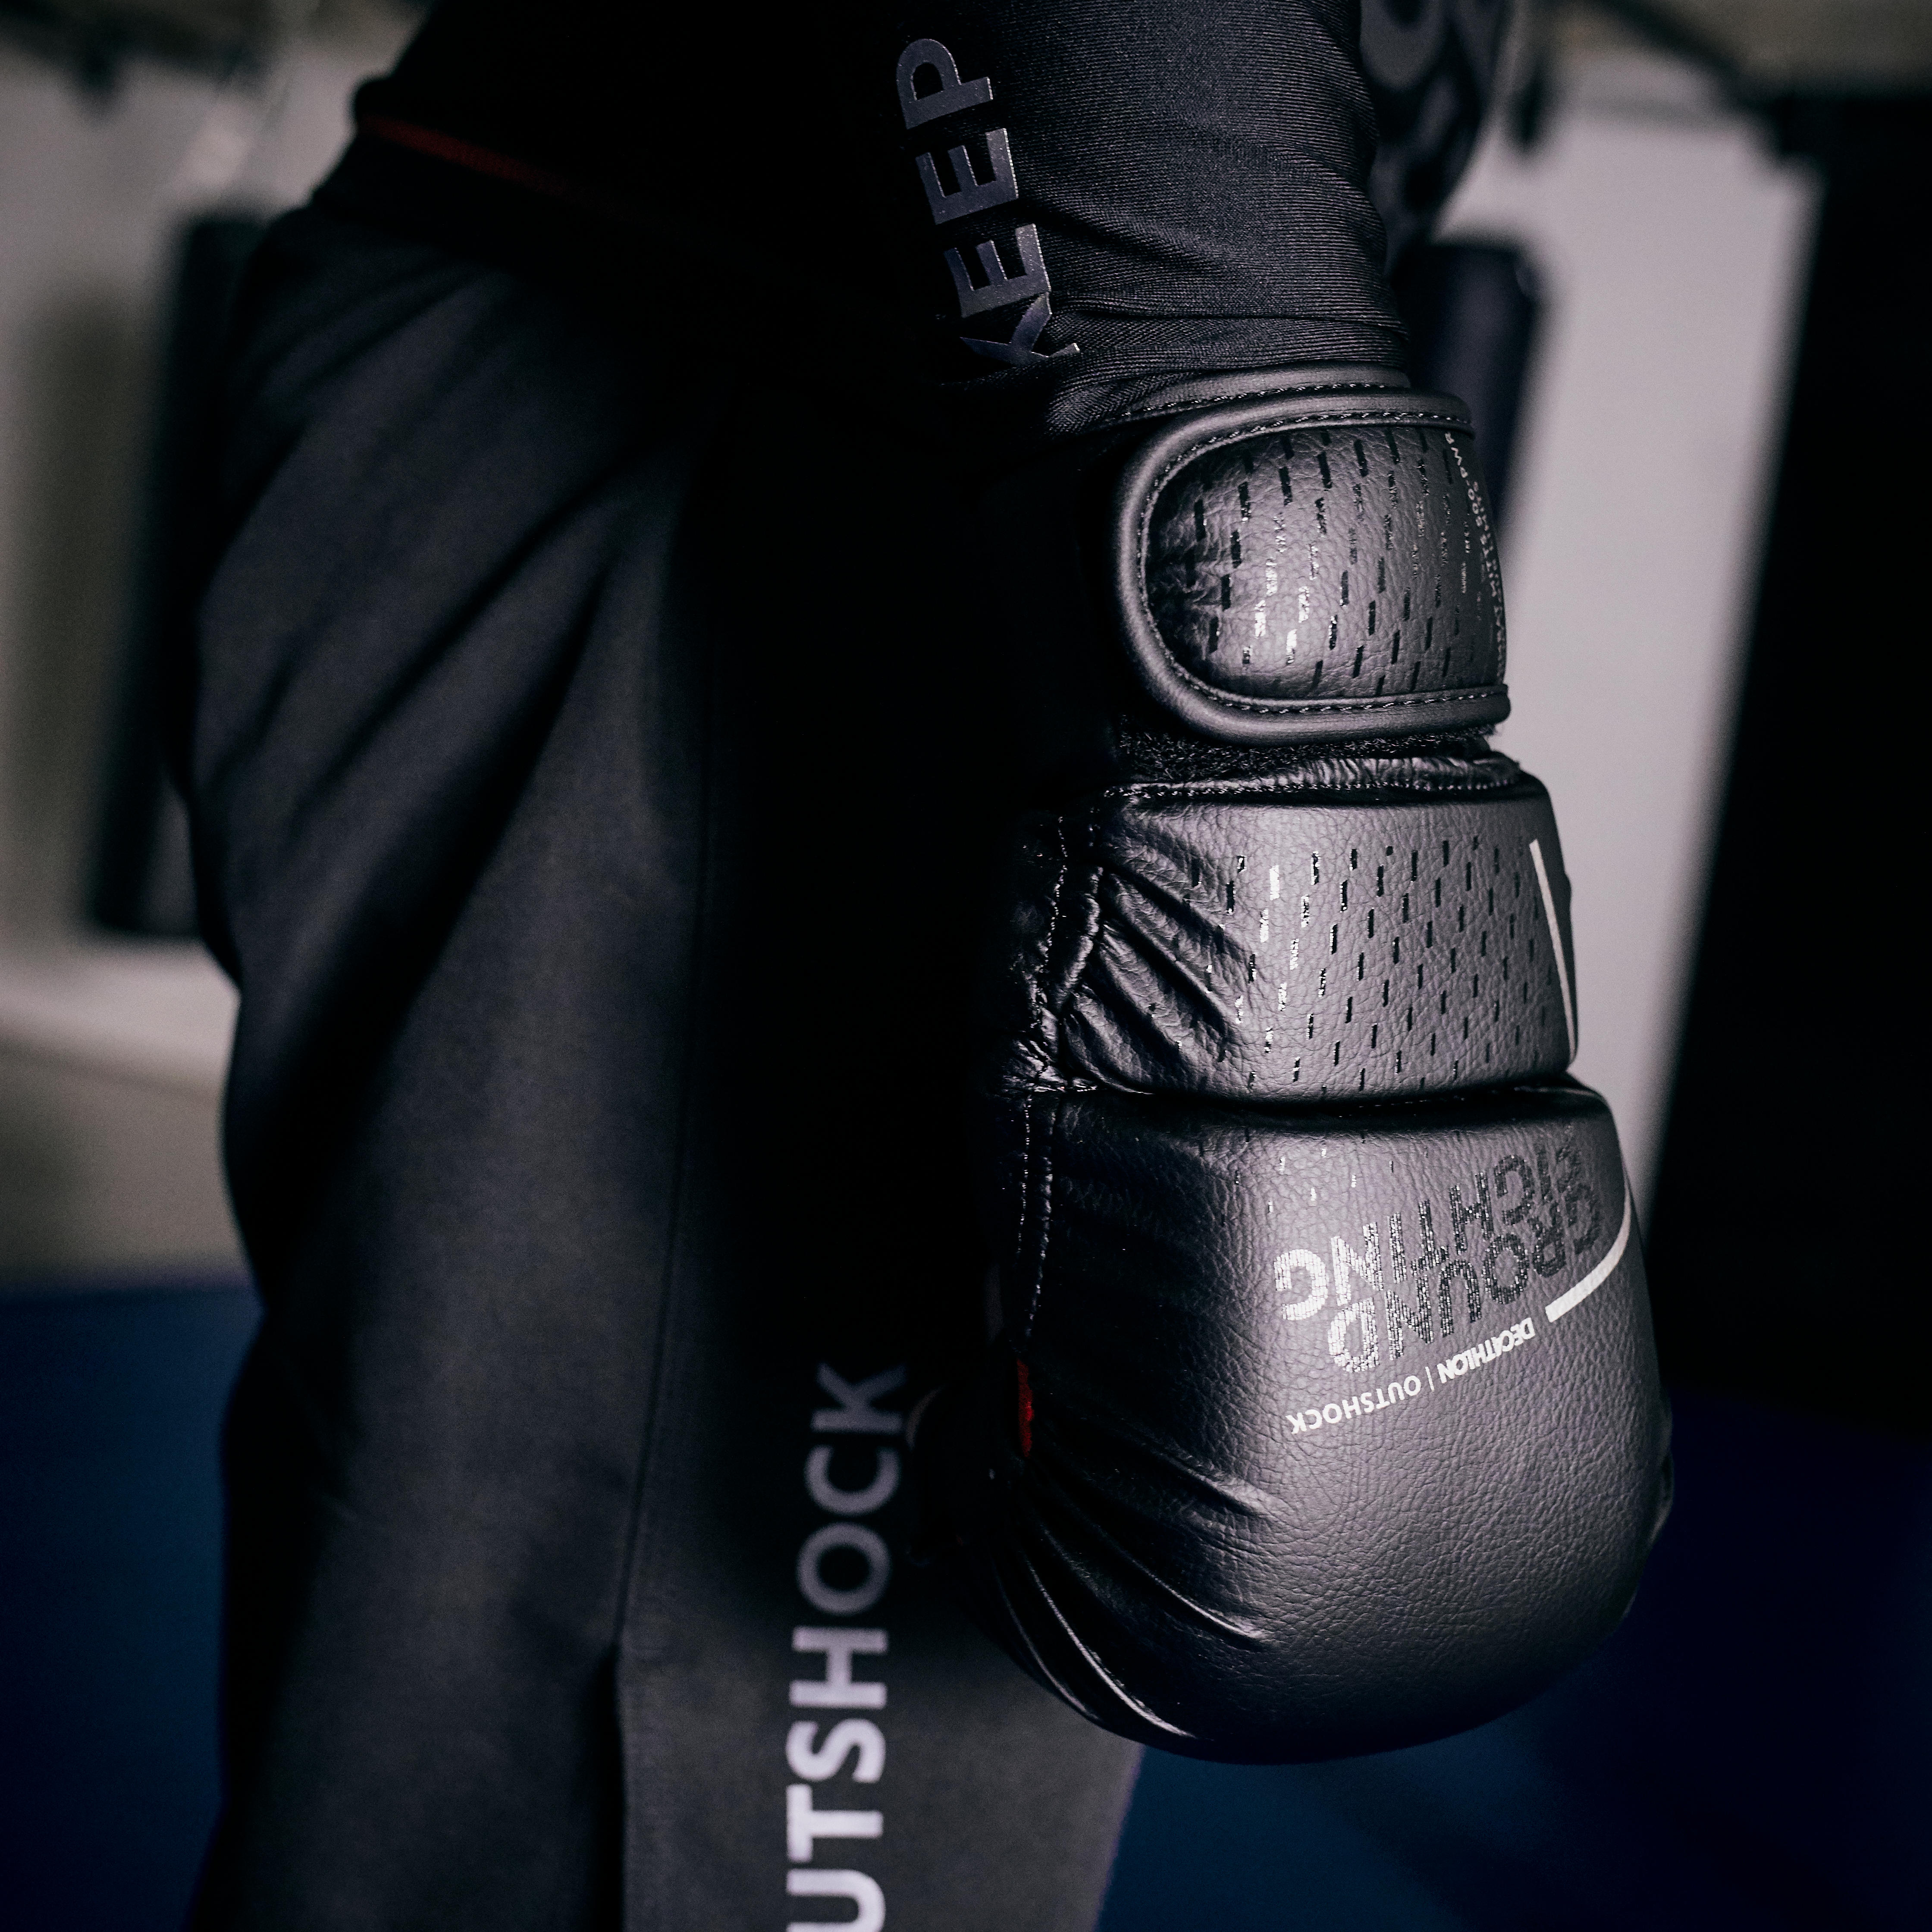 Combat and Grappling Mitts 500 - Black - OUTSHOCK